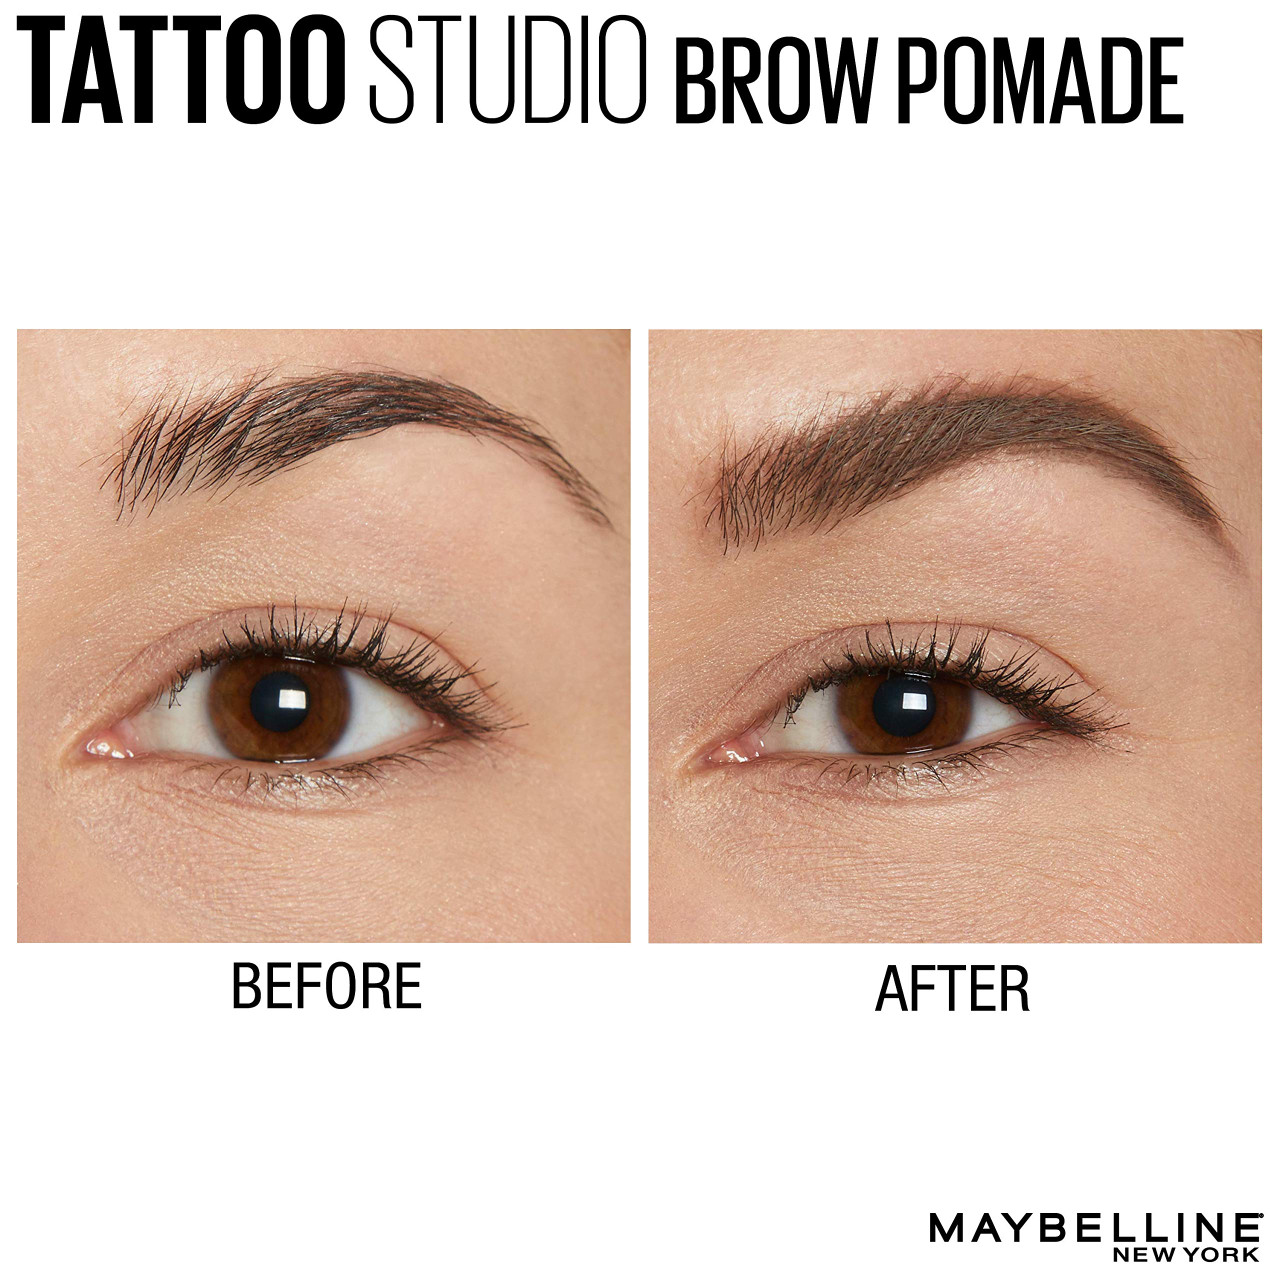 Exclusive Maybelline Is Launching Tattoo Studio Brow Pomade  Allure